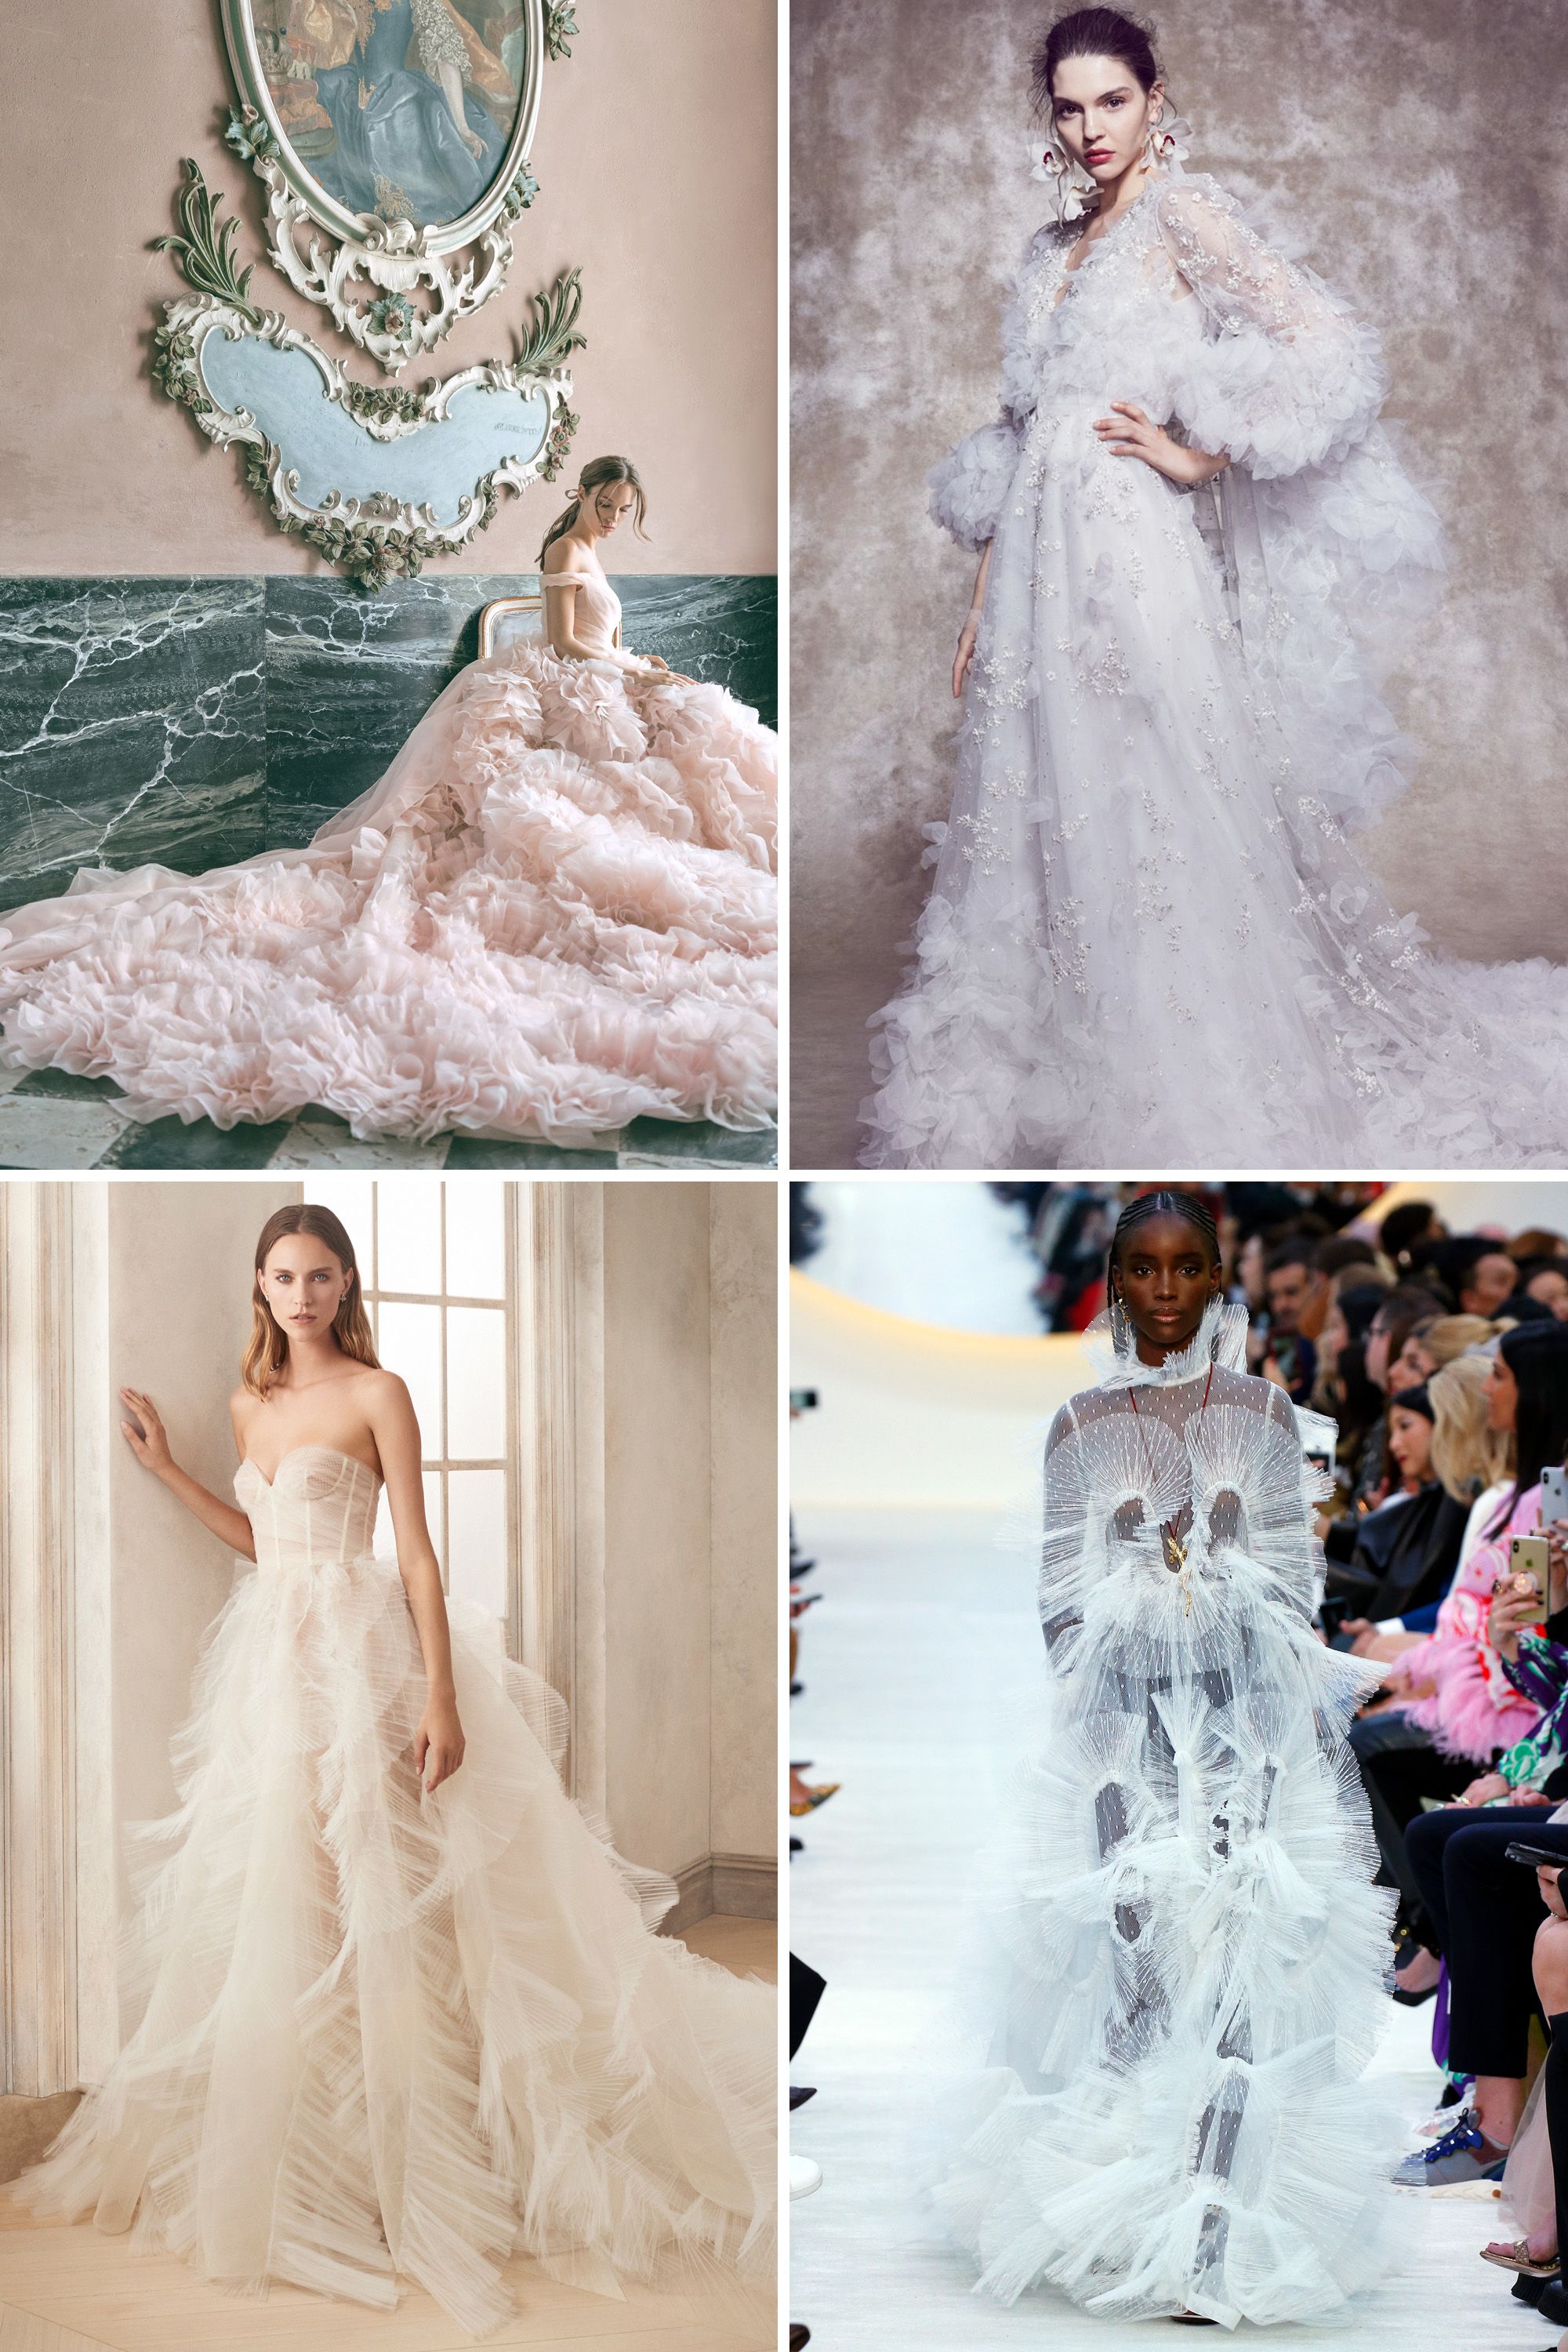 The 20 Wedding Dress Trends of 2020 ...